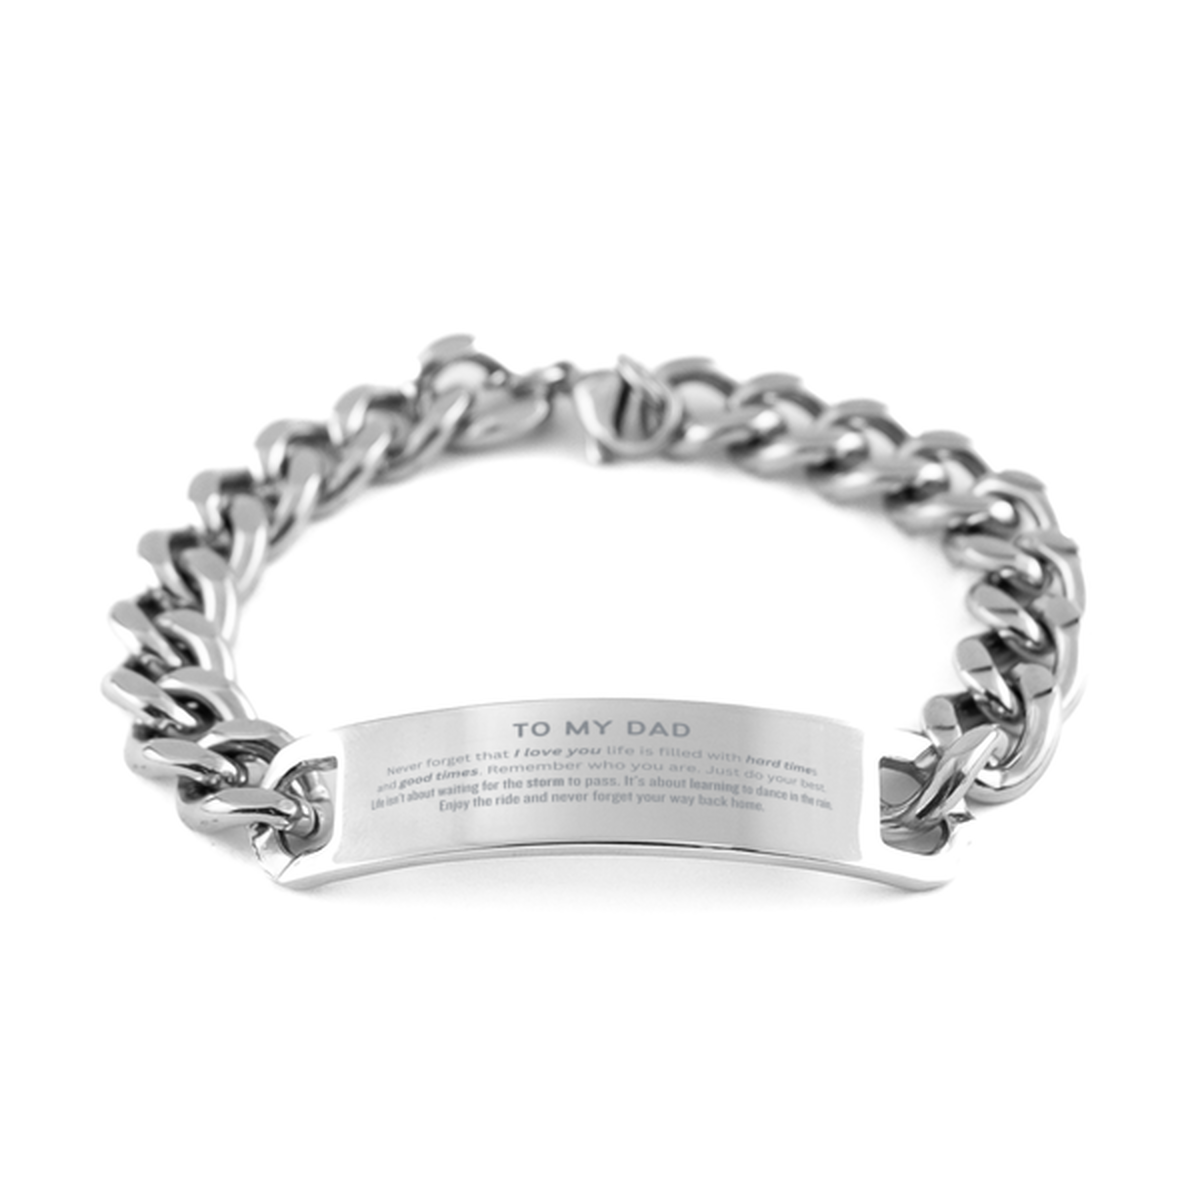 Christmas Dad Cuban Chain Stainless Steel Bracelet Gifts, To My Dad Birthday Thank You Gifts For Dad, Graduation Unique Gifts For Dad To My Dad Never forget that I love you life is filled with hard times and good times. Remember who you are. Just do your